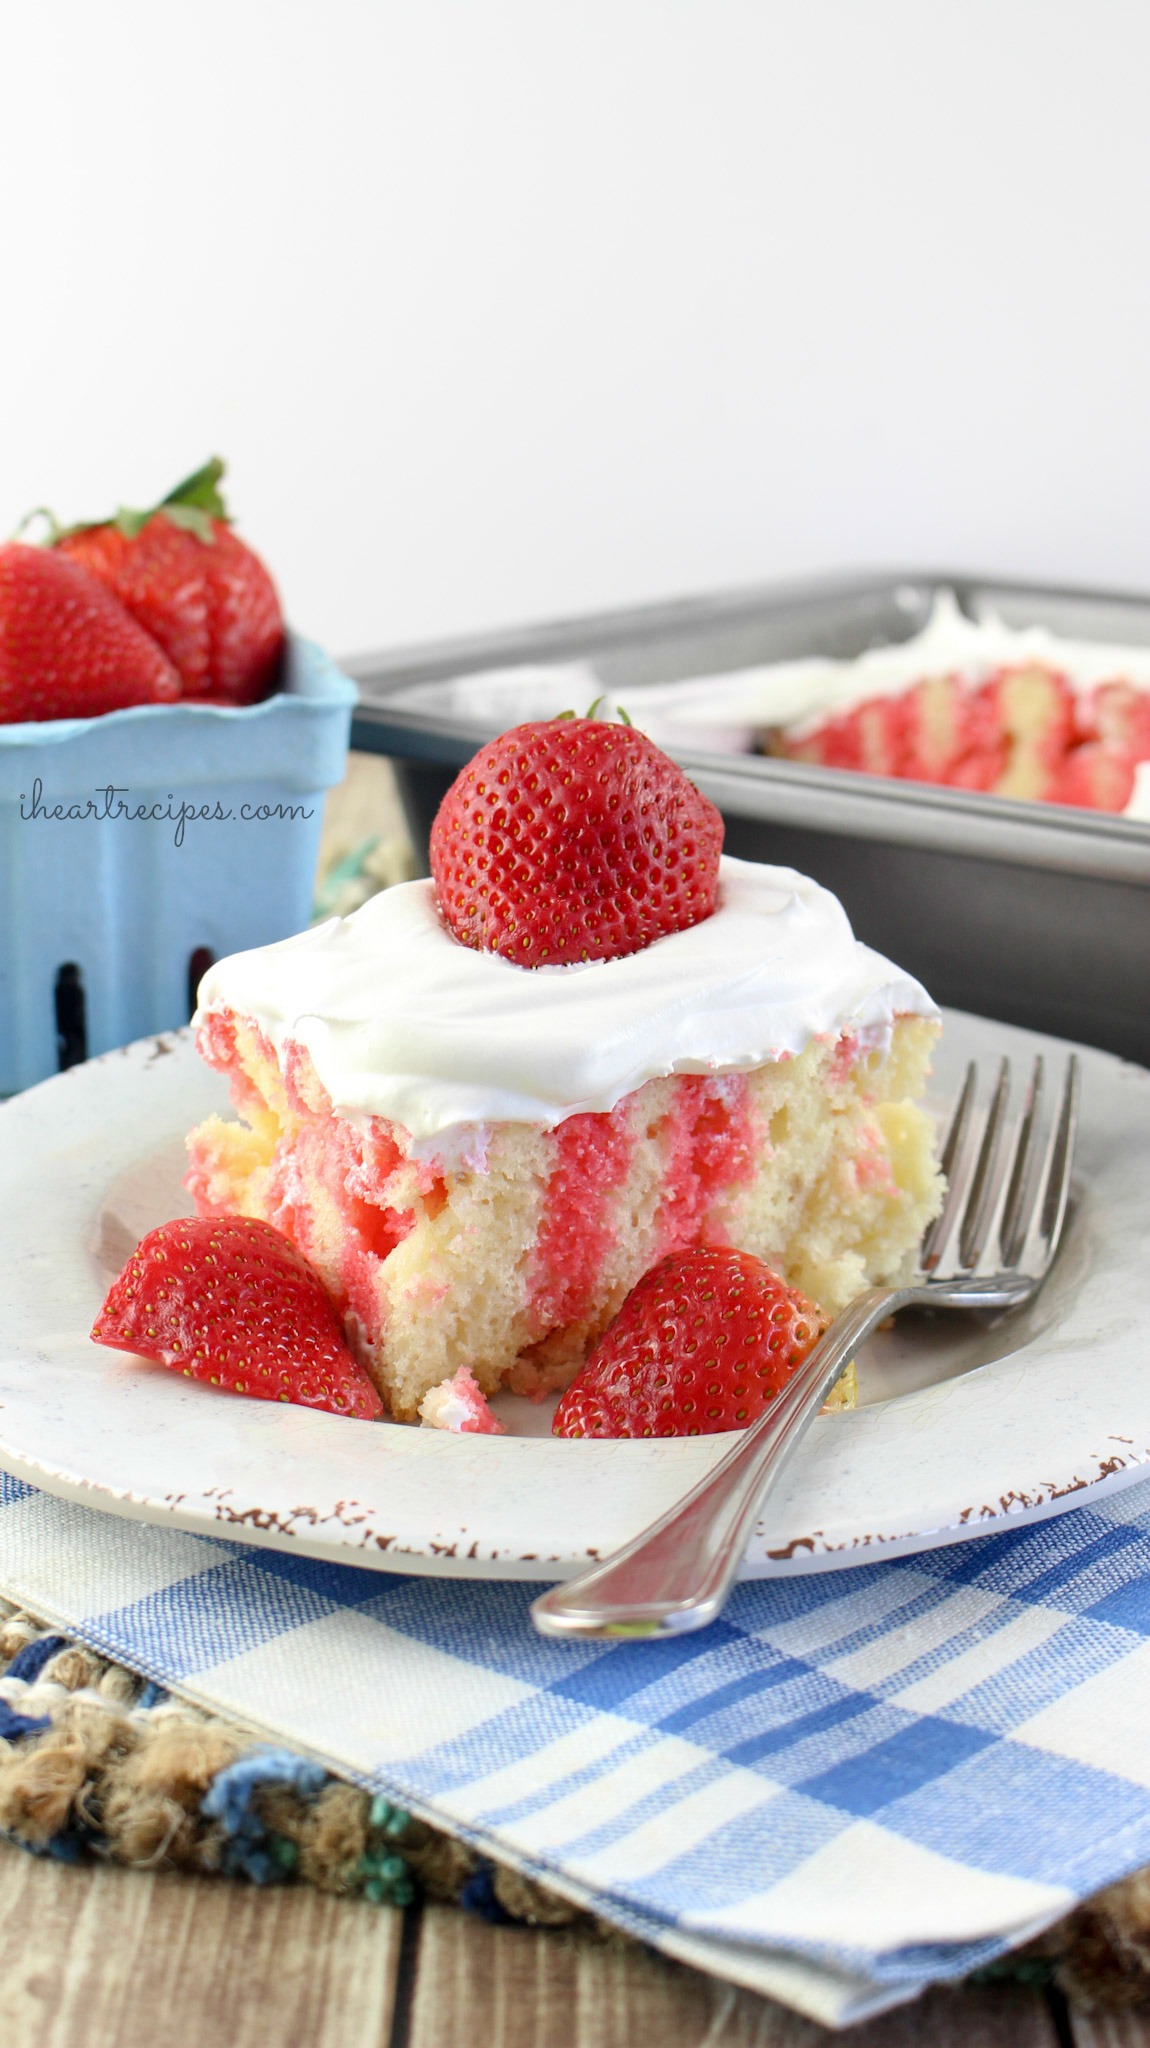 A moist strawberry jello poke cake topped with creamy whipped cream and fresh strawberries on a rustic white plate ready to be served. A delicious dessert!